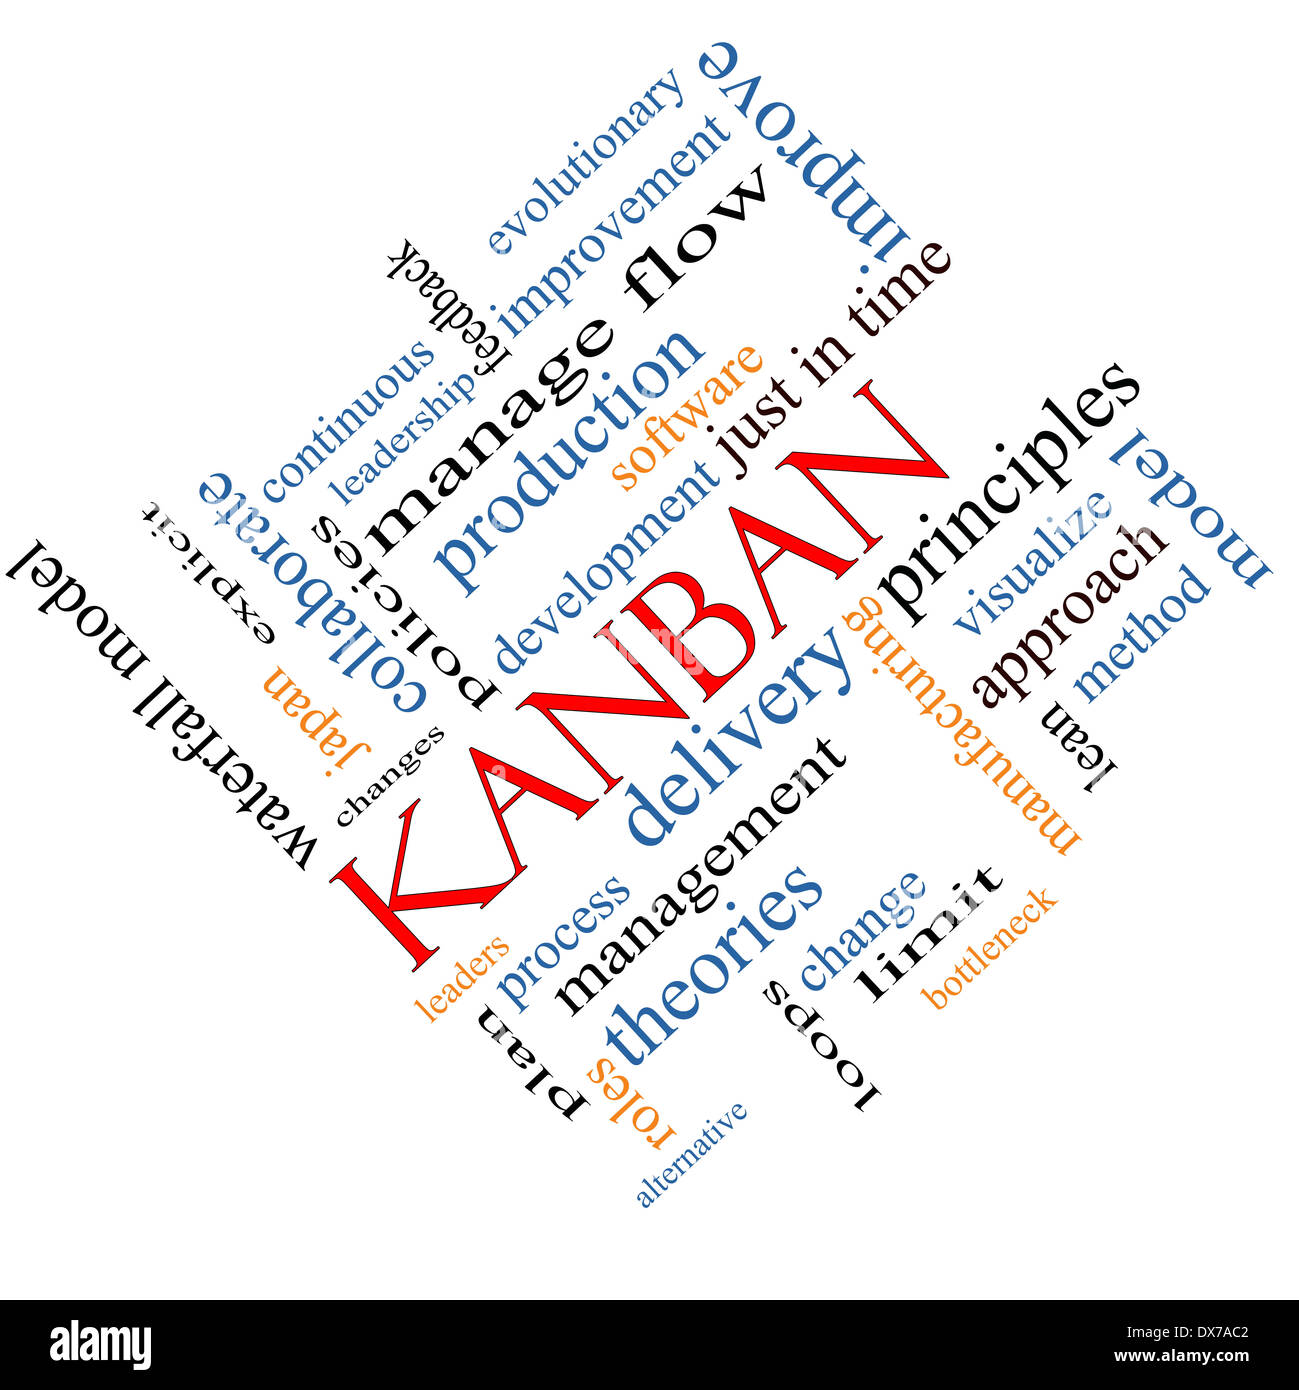 Kanban Word Cloud Concept angled with great terms such as loops, process, manage, flow and more. Stock Photo